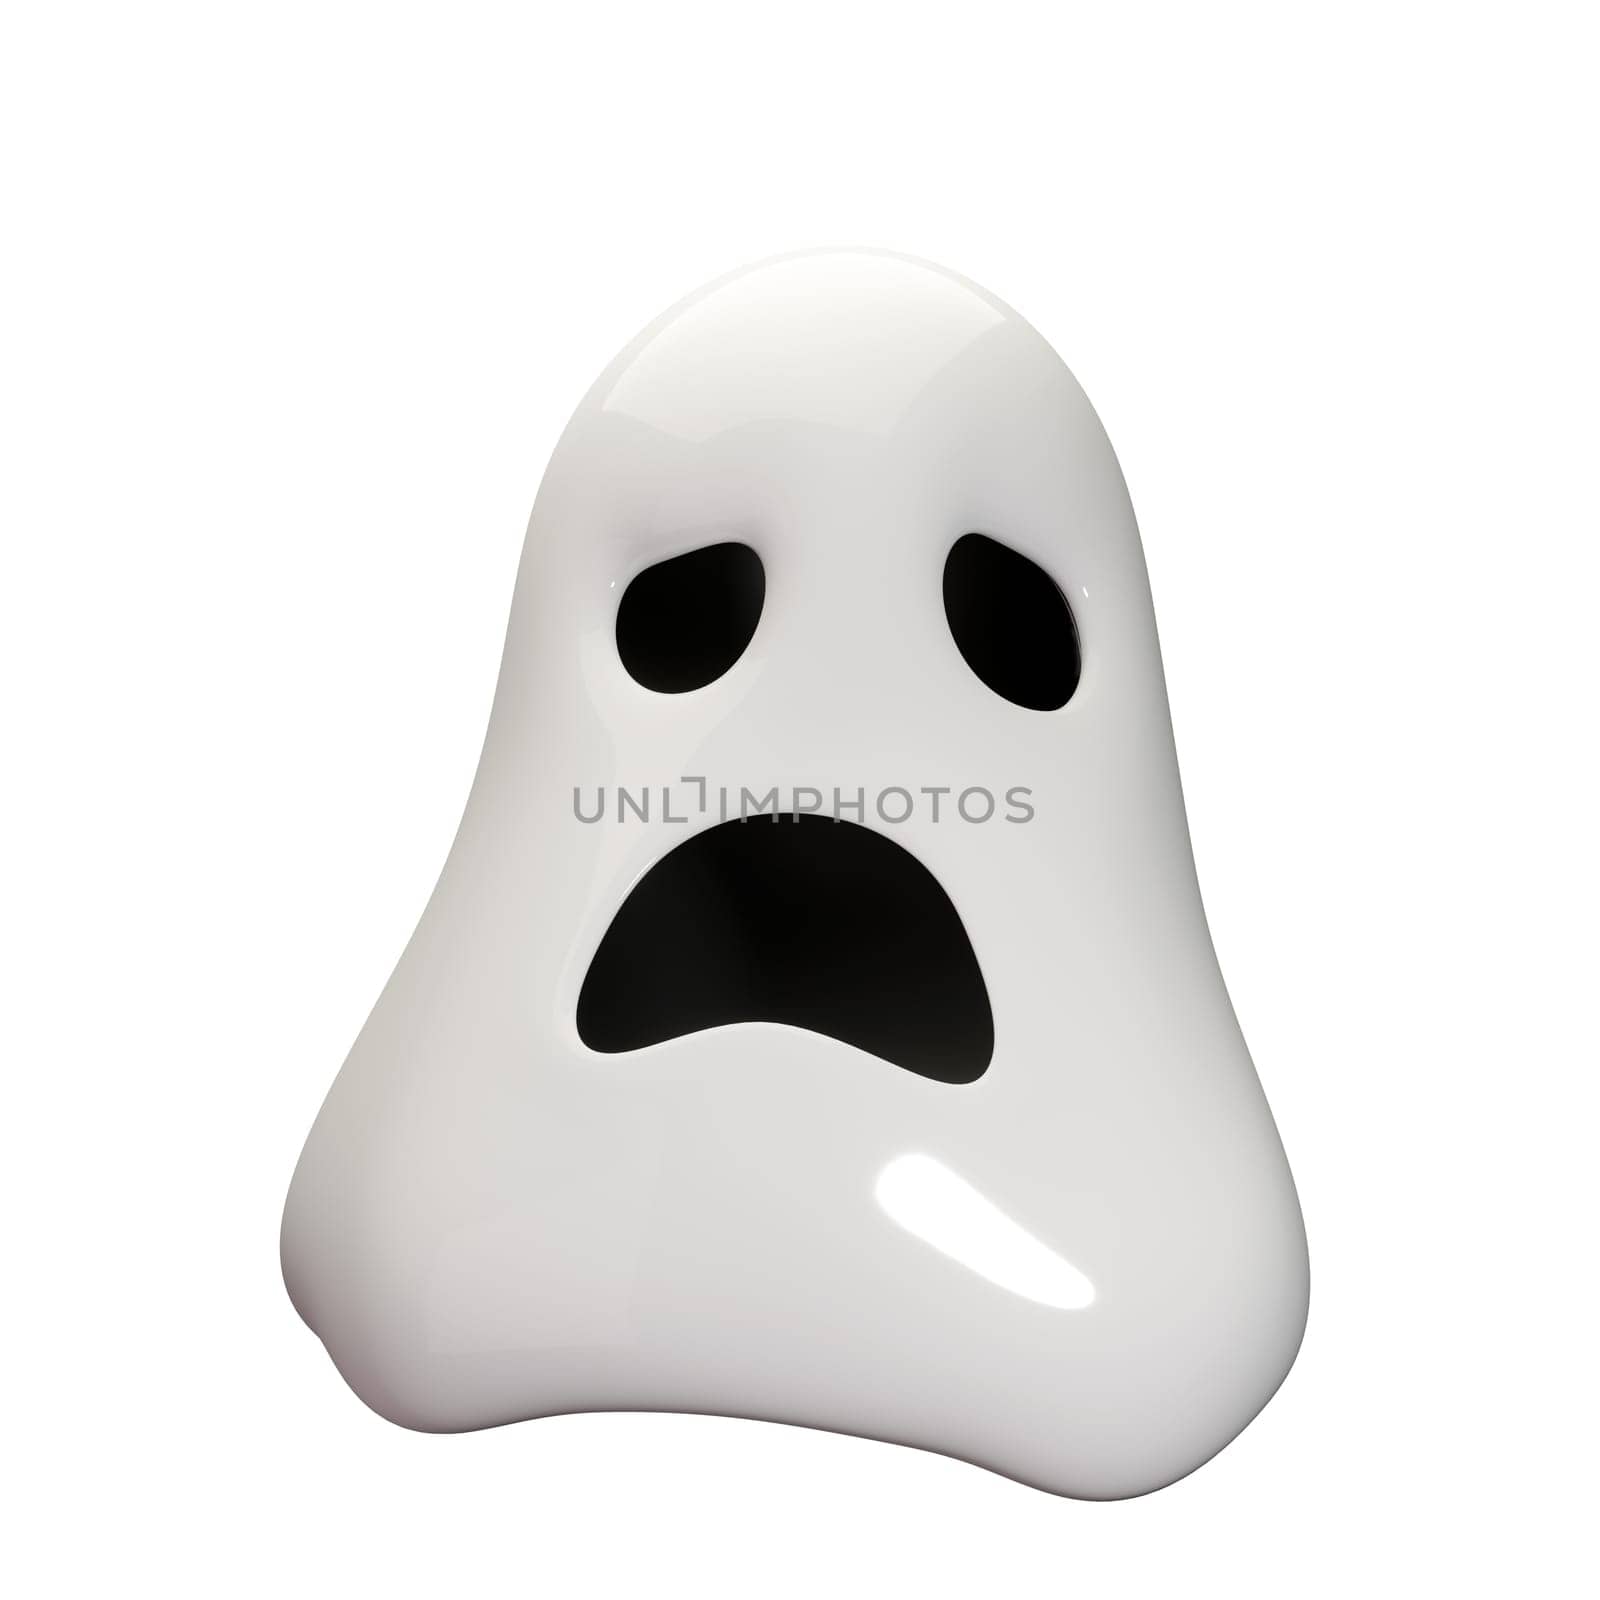 Halloween Ghost. Cute ghost character. Realistic 3d design element In plastic cartoon style. Icon isolated on white background. Clipping path.